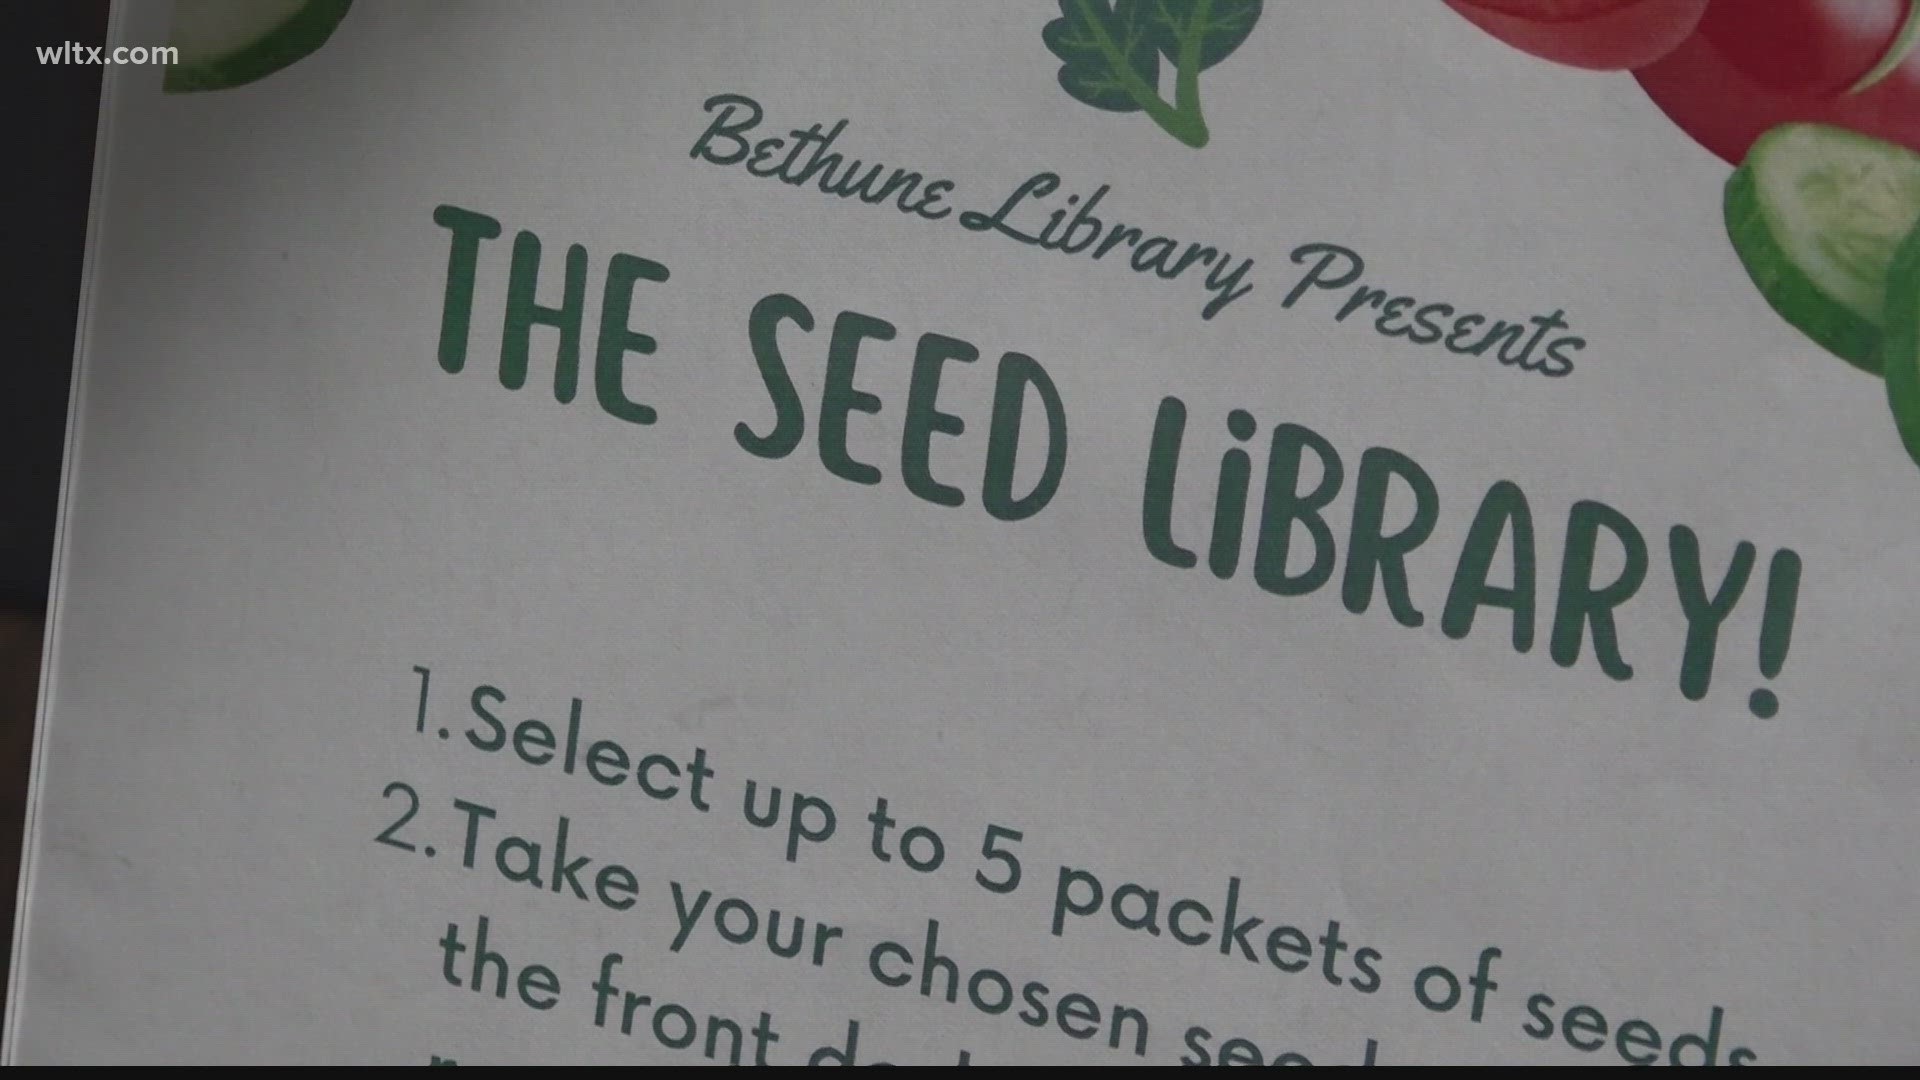 The 'seed library' is free and available at the Bethune branch of the Kershaw County library.